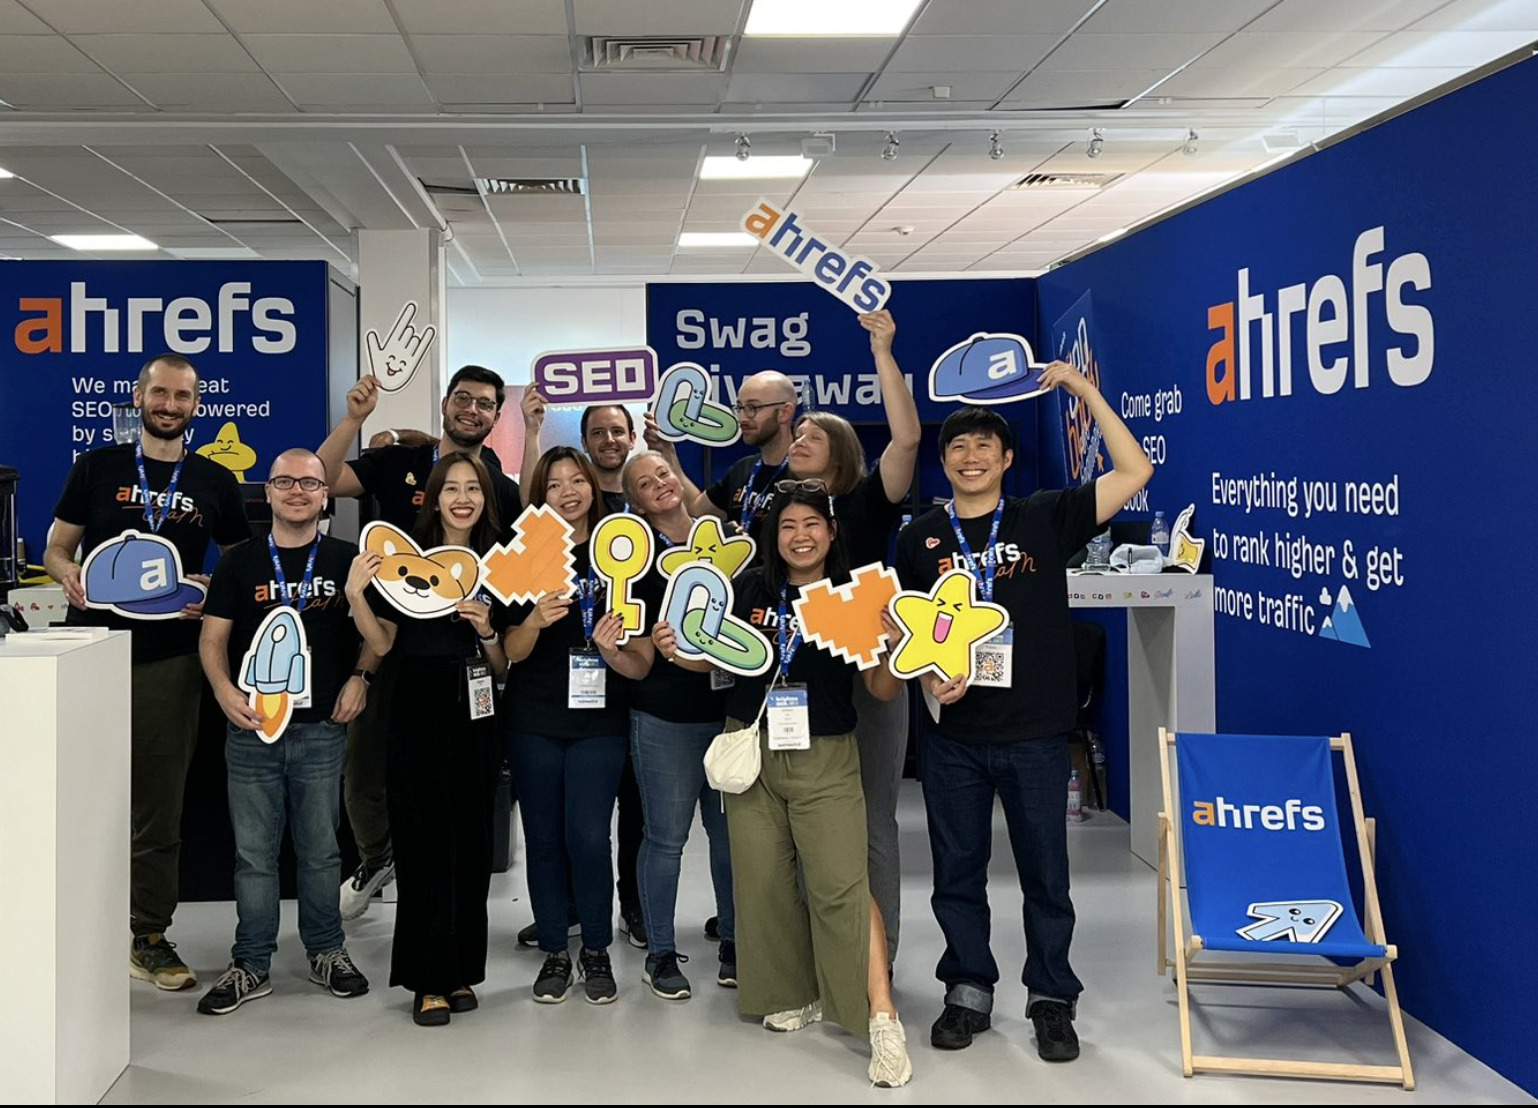 Ahrefs team posing for a picture
